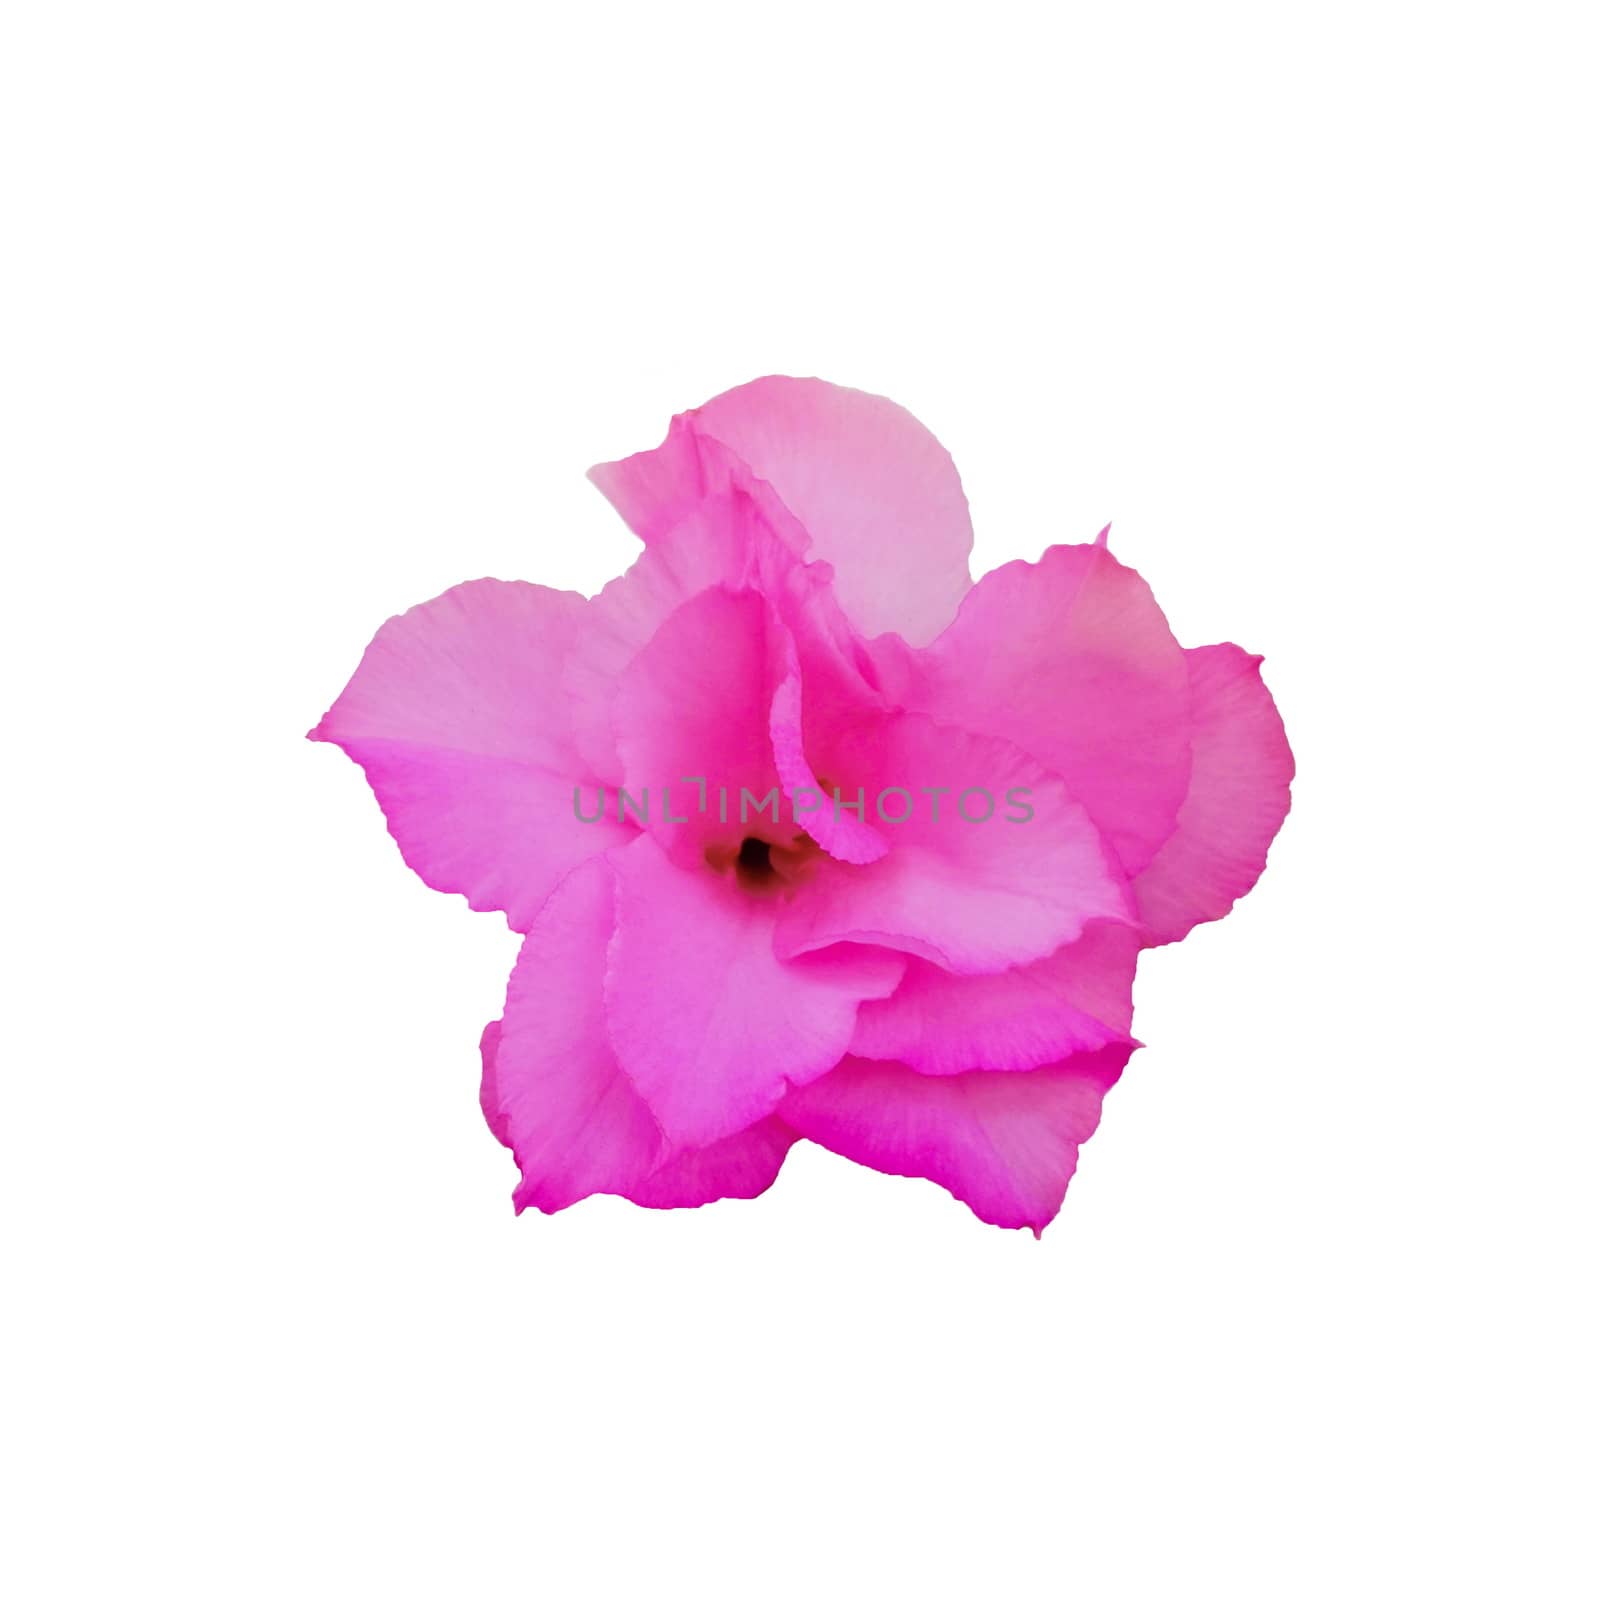 Close-Up pink flower Isolated on white background.